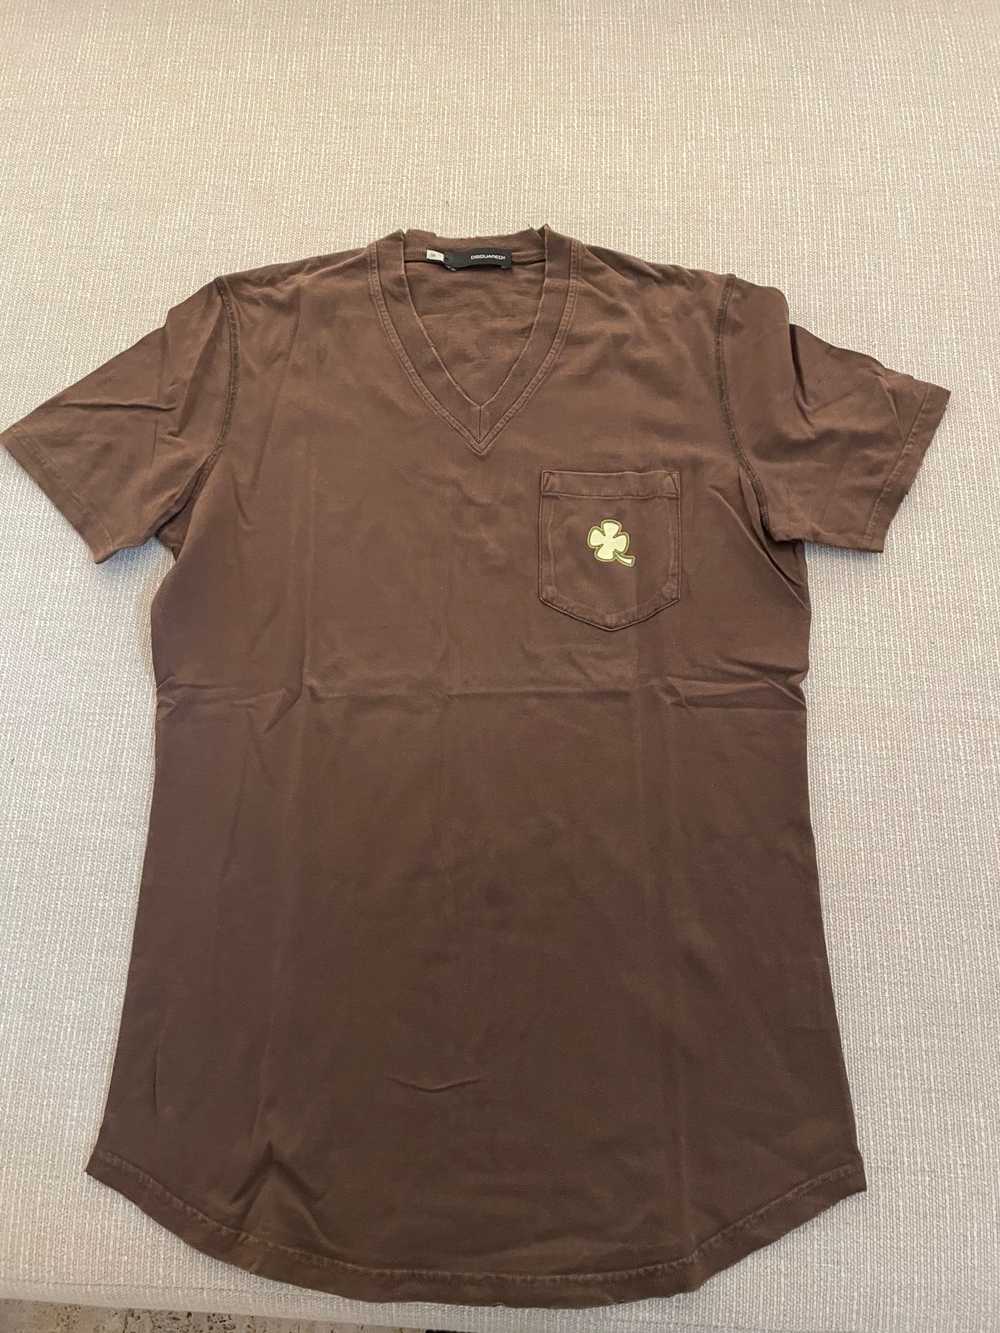 Dsquared2 DSquared brown tshirt - image 2